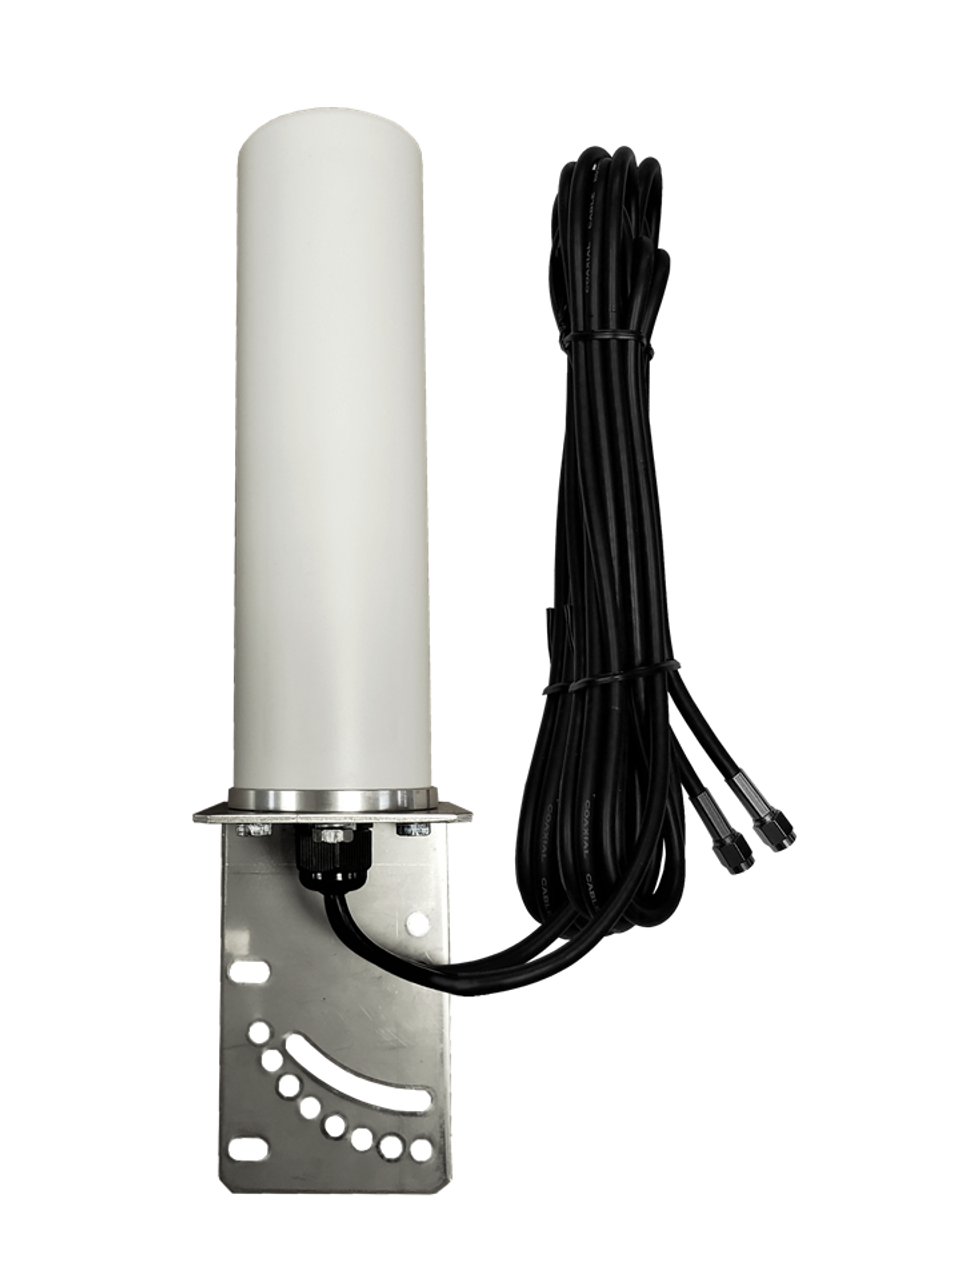 M19 Sierra Wireless LX60 Gateway M19 Omni Directional MIMO Cellular 4G LTE AWS XLTE M2M IoT Antenna w/16ft Coax Cables -2  x SMA